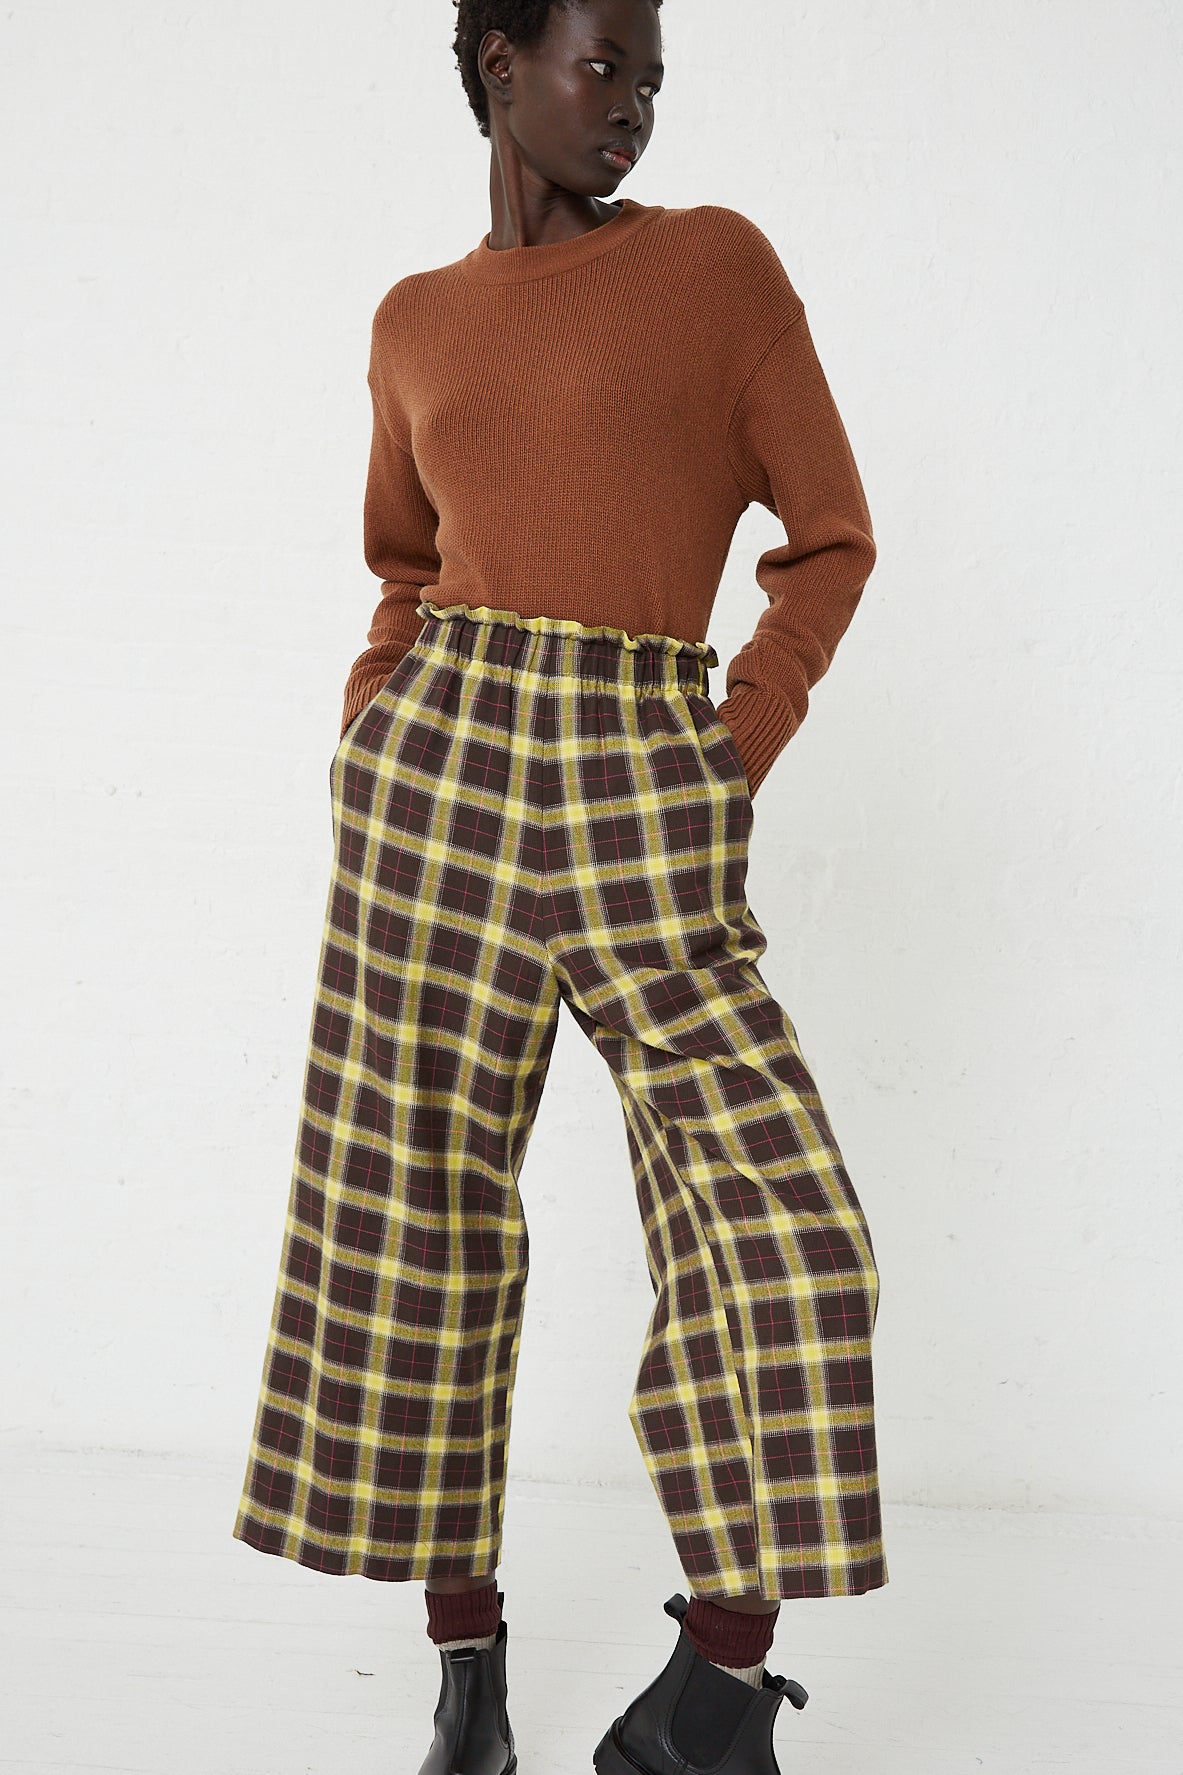 The model is wearing AVN's Easy Pant in Check Brown, Yellow and Pink, a wide leg and relaxed fit brown and yellow plaid cropped pants.